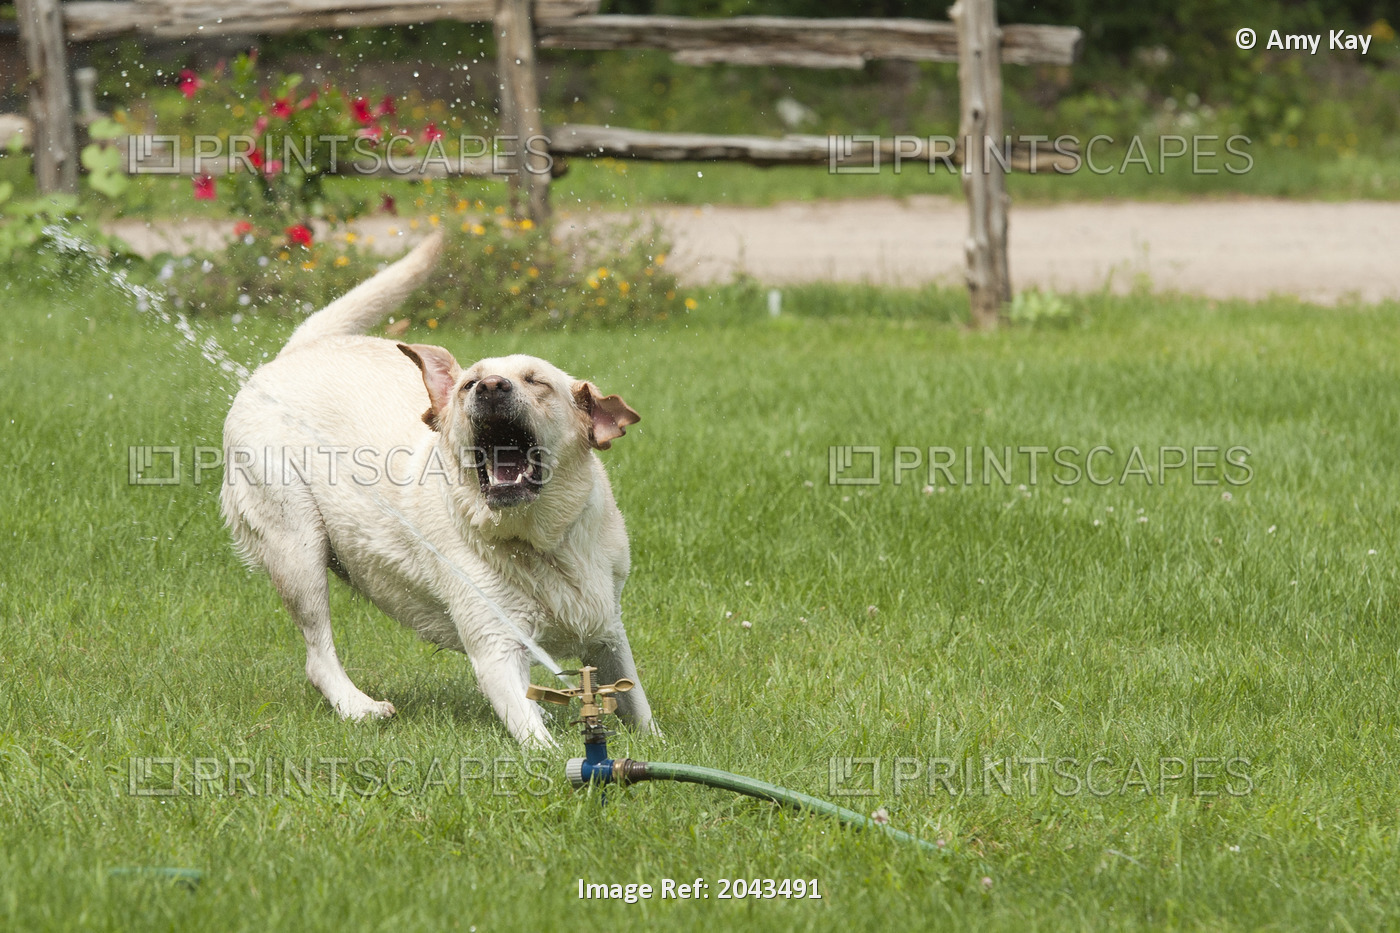 Yellow Labrador Retriever Dog Trying To Catch Water From A Sprinkler, Ontario